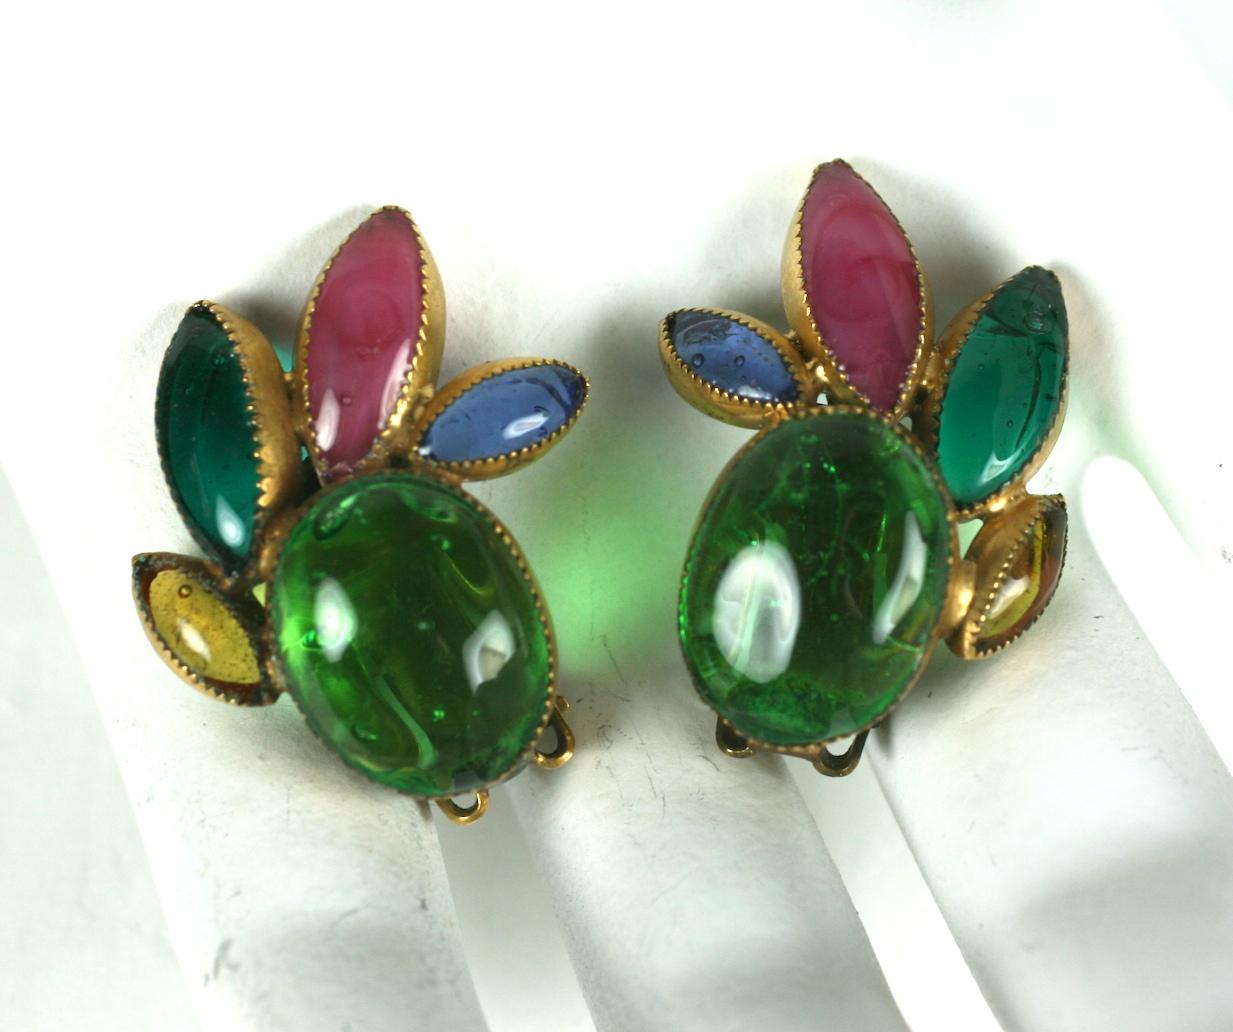 Hattie Carnegie Poured Glass Earrings from the 1950's. Made by Maison Gripoix with jewel toned poured glass and serrated settings. Clip back fittings. 1950's USA.
Poured Glass Made in France.
1.25